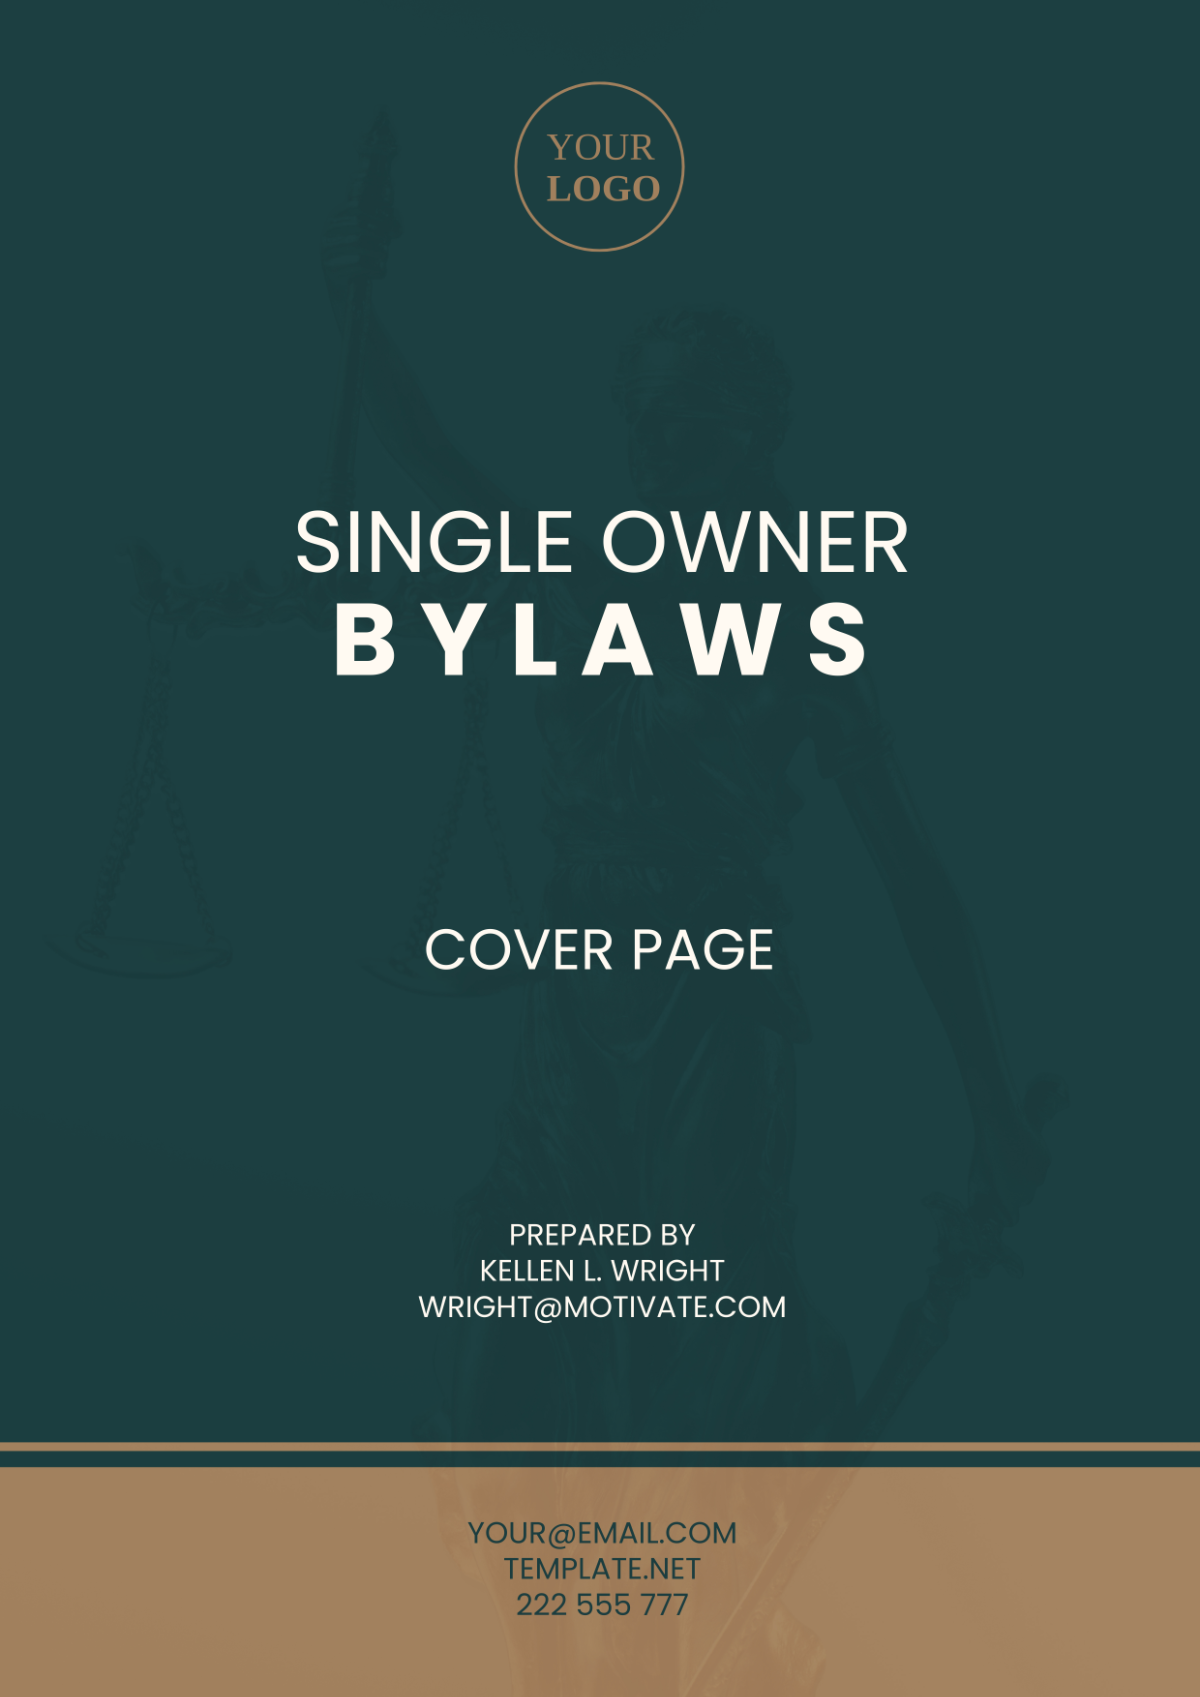 Single Owner Bylaws Cover Page Template